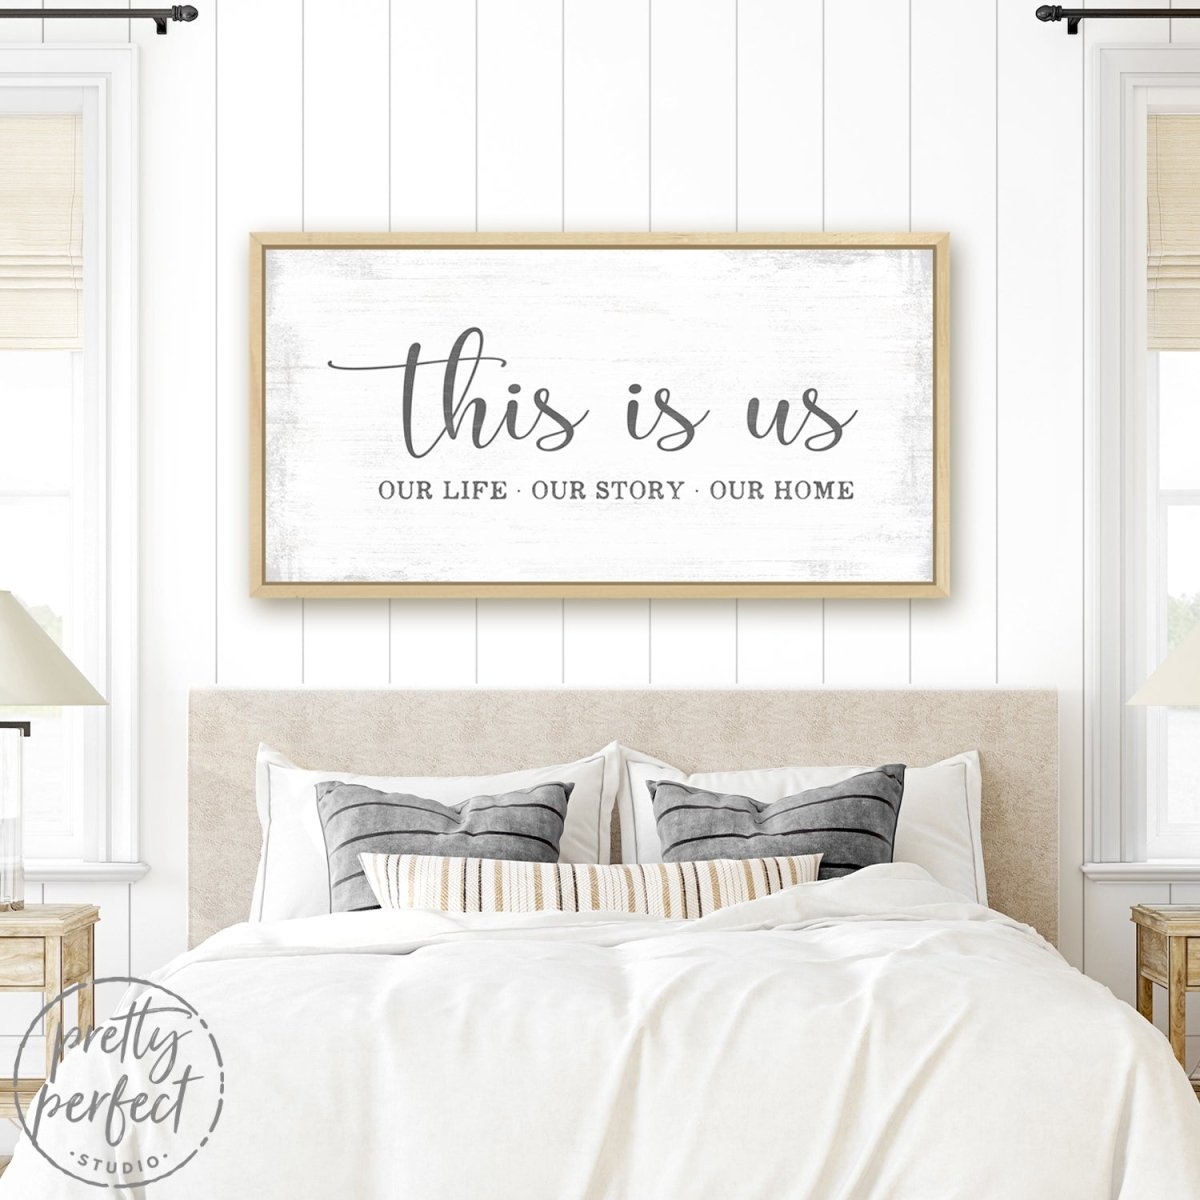 This Is Us Family Canvas Sign Above Bed - Pretty Perfect Studio